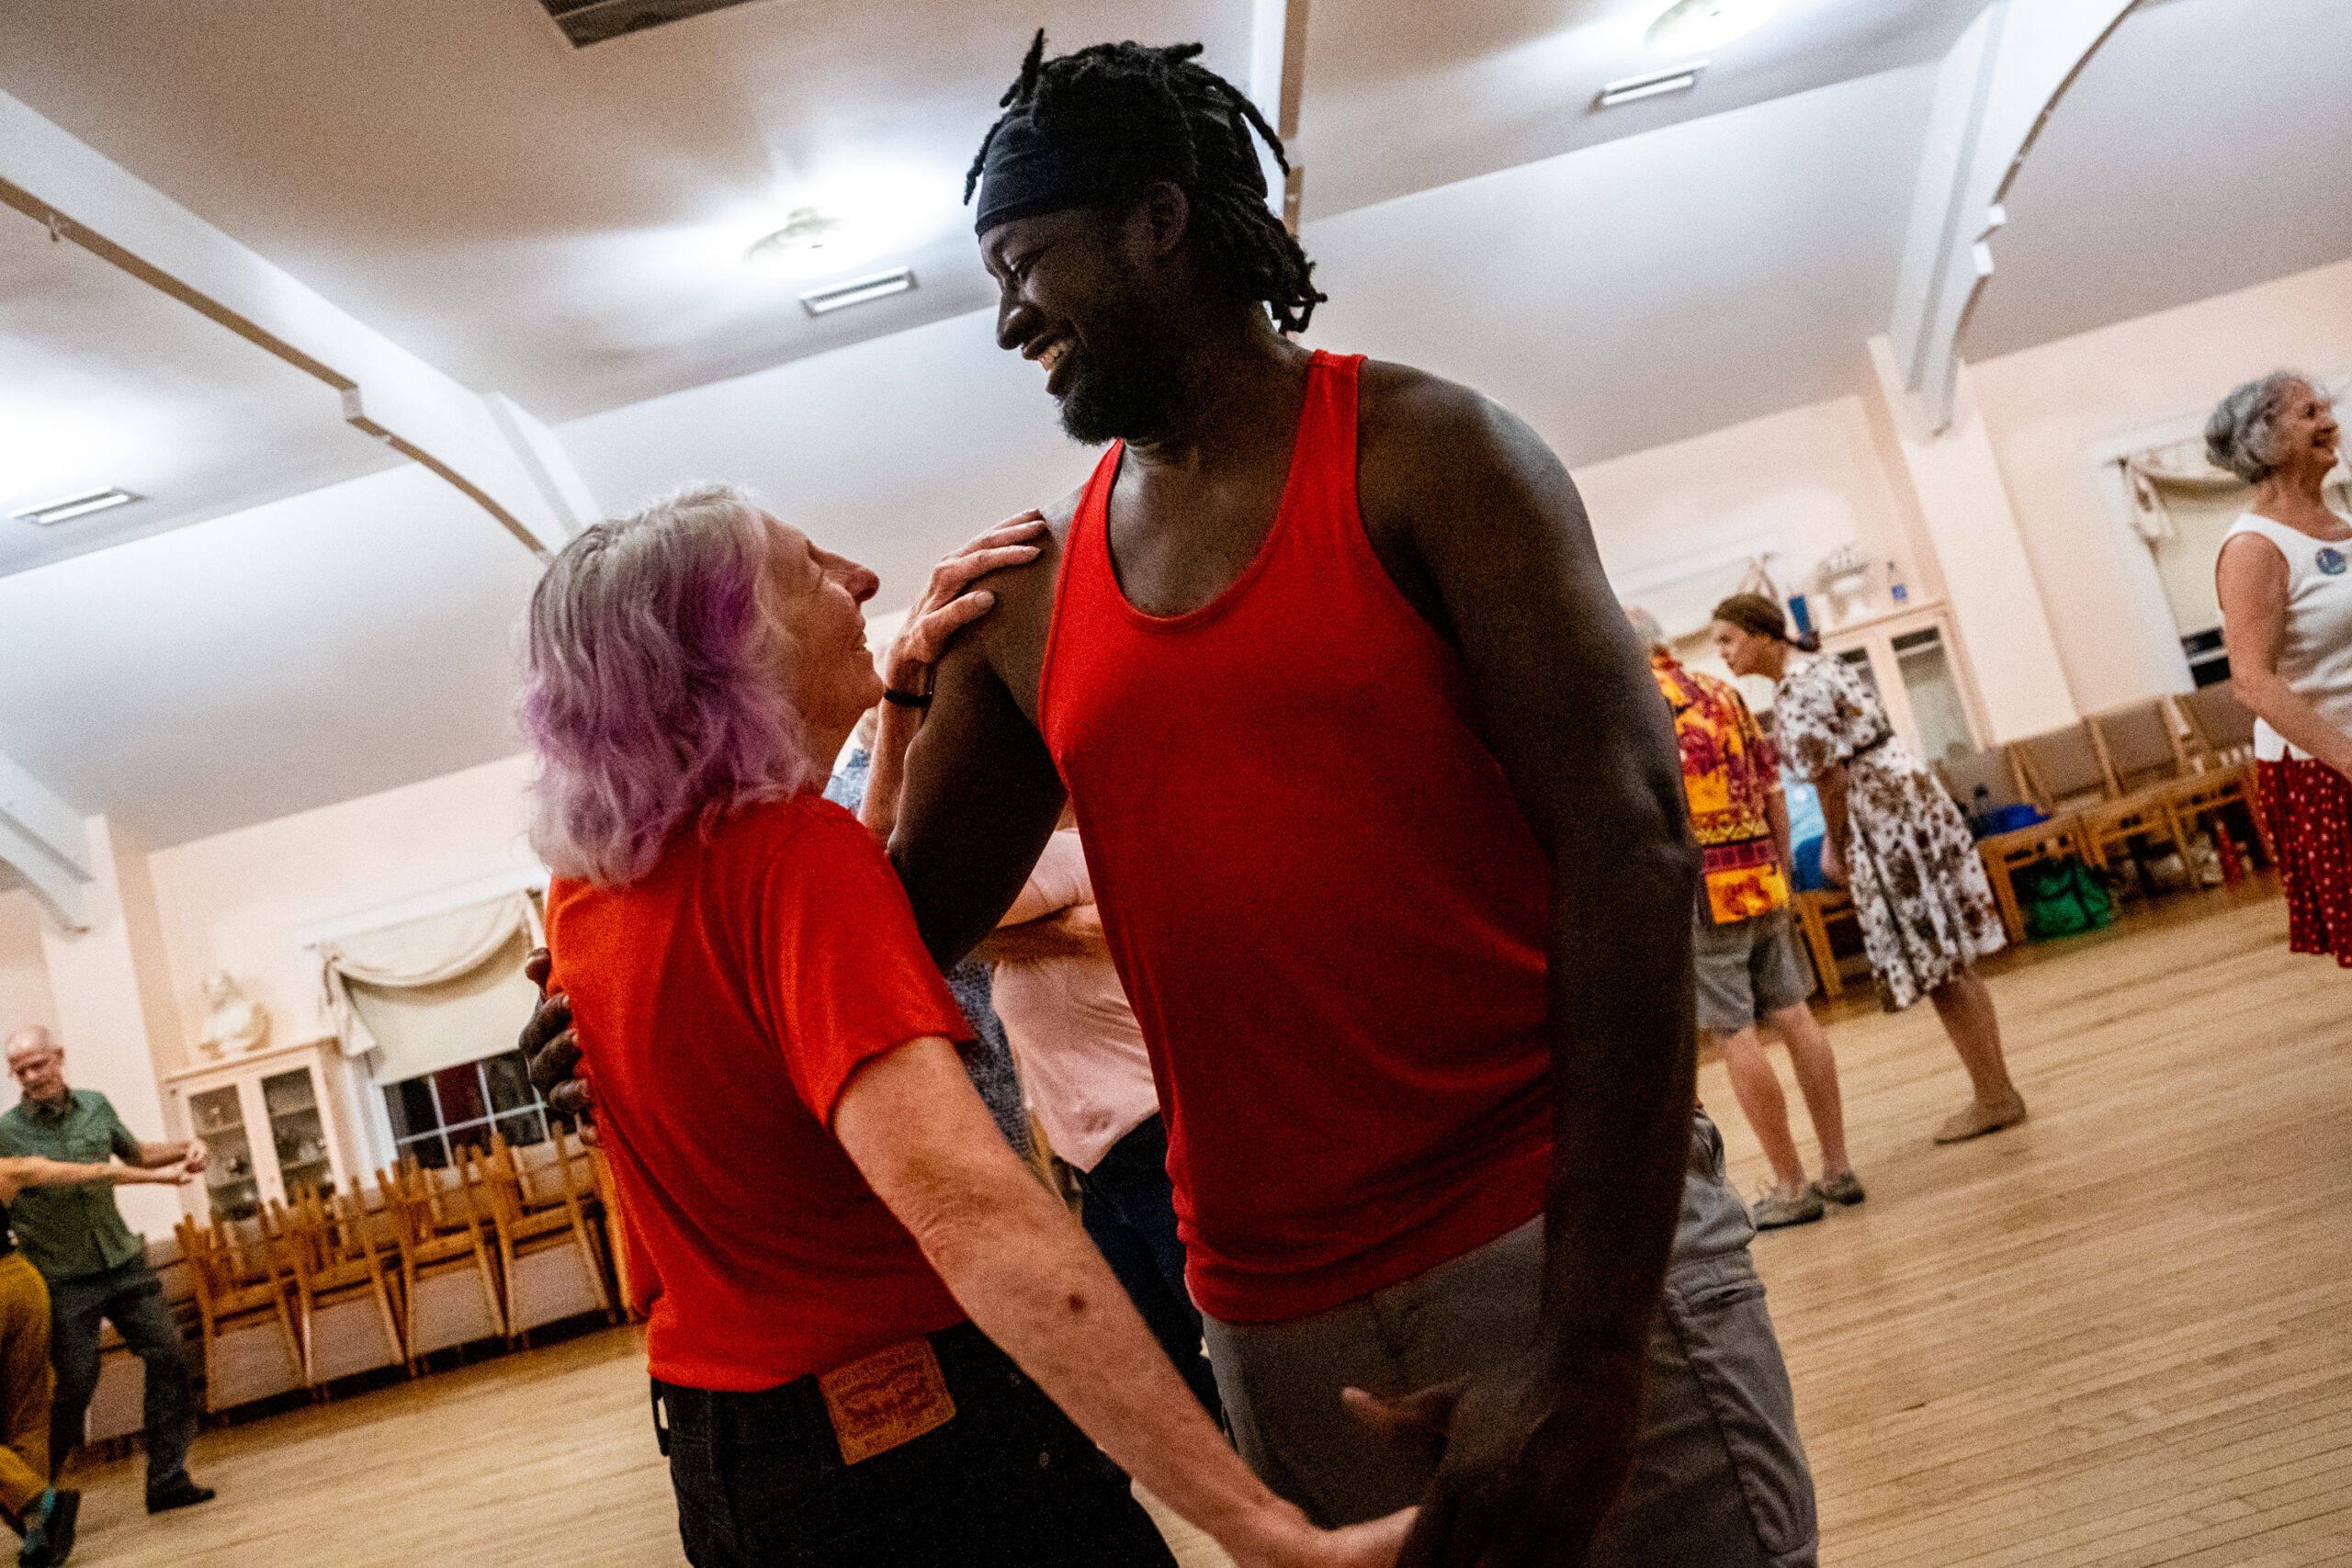 A Black man in his early 40s in a red shirt dances with a white woman in her mid-70s wearing a red shirt.